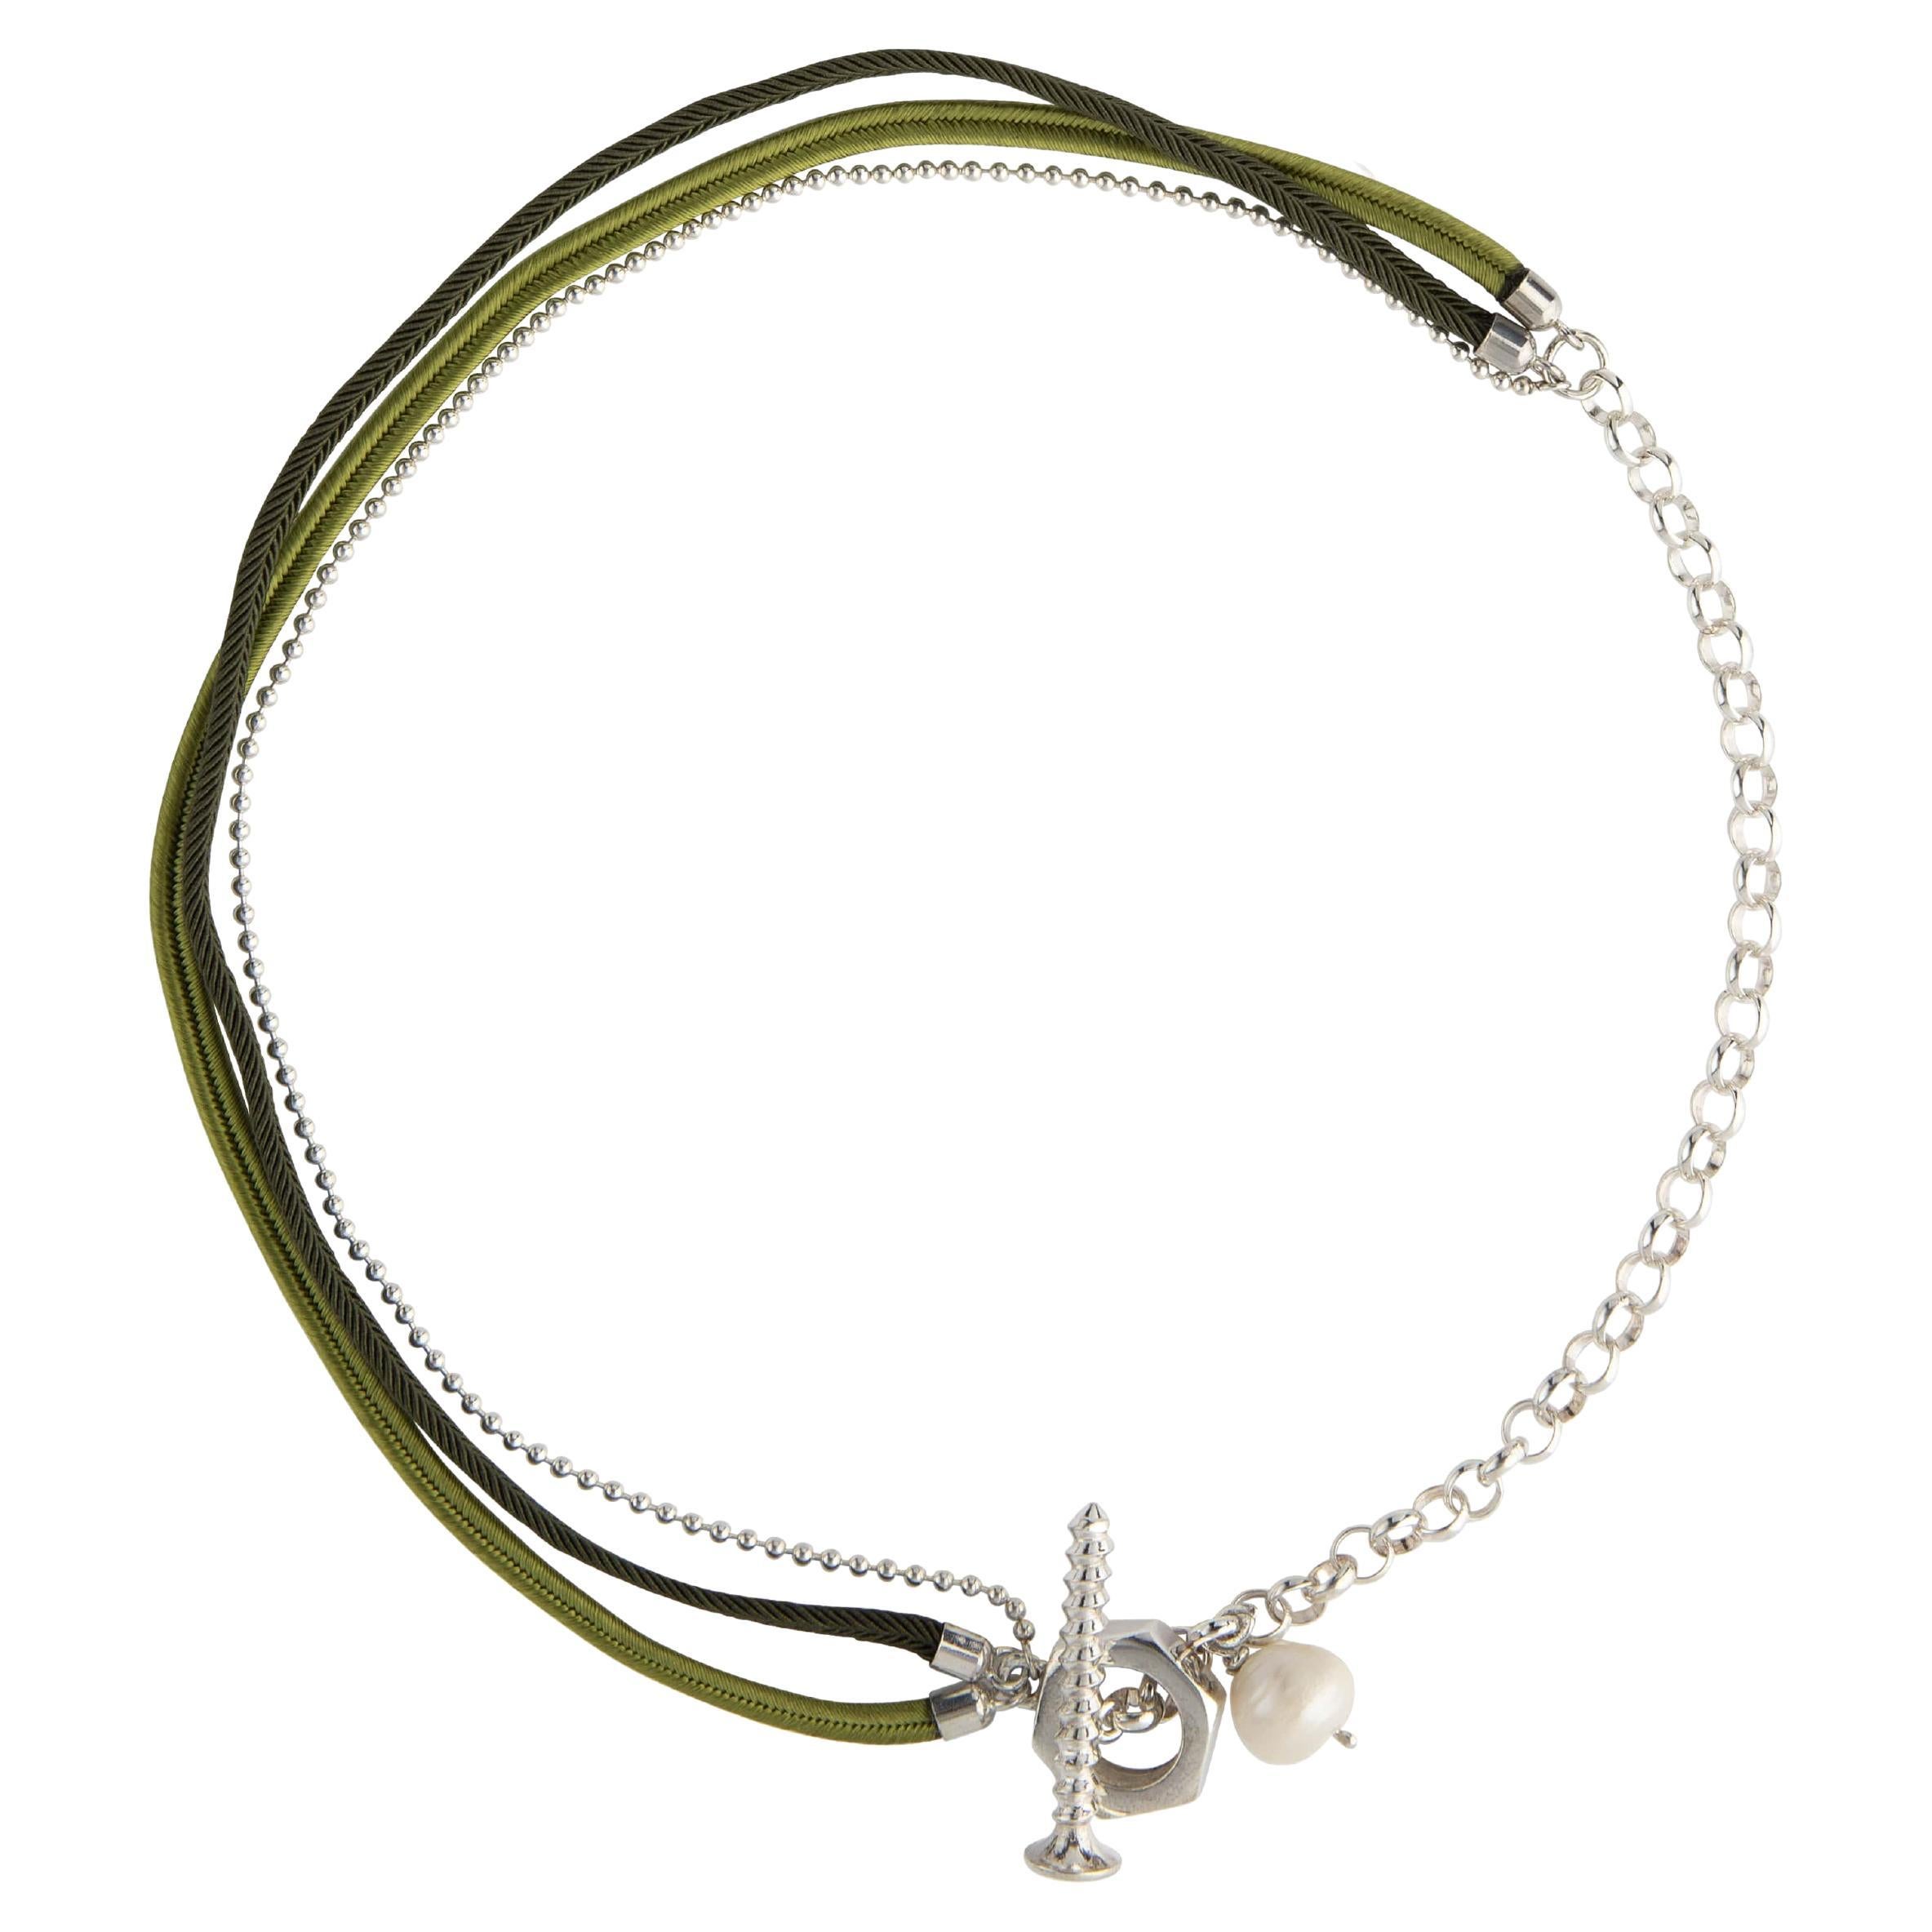 Silver Necklace with Green Ribbons and Hanging Freshwater Pearl